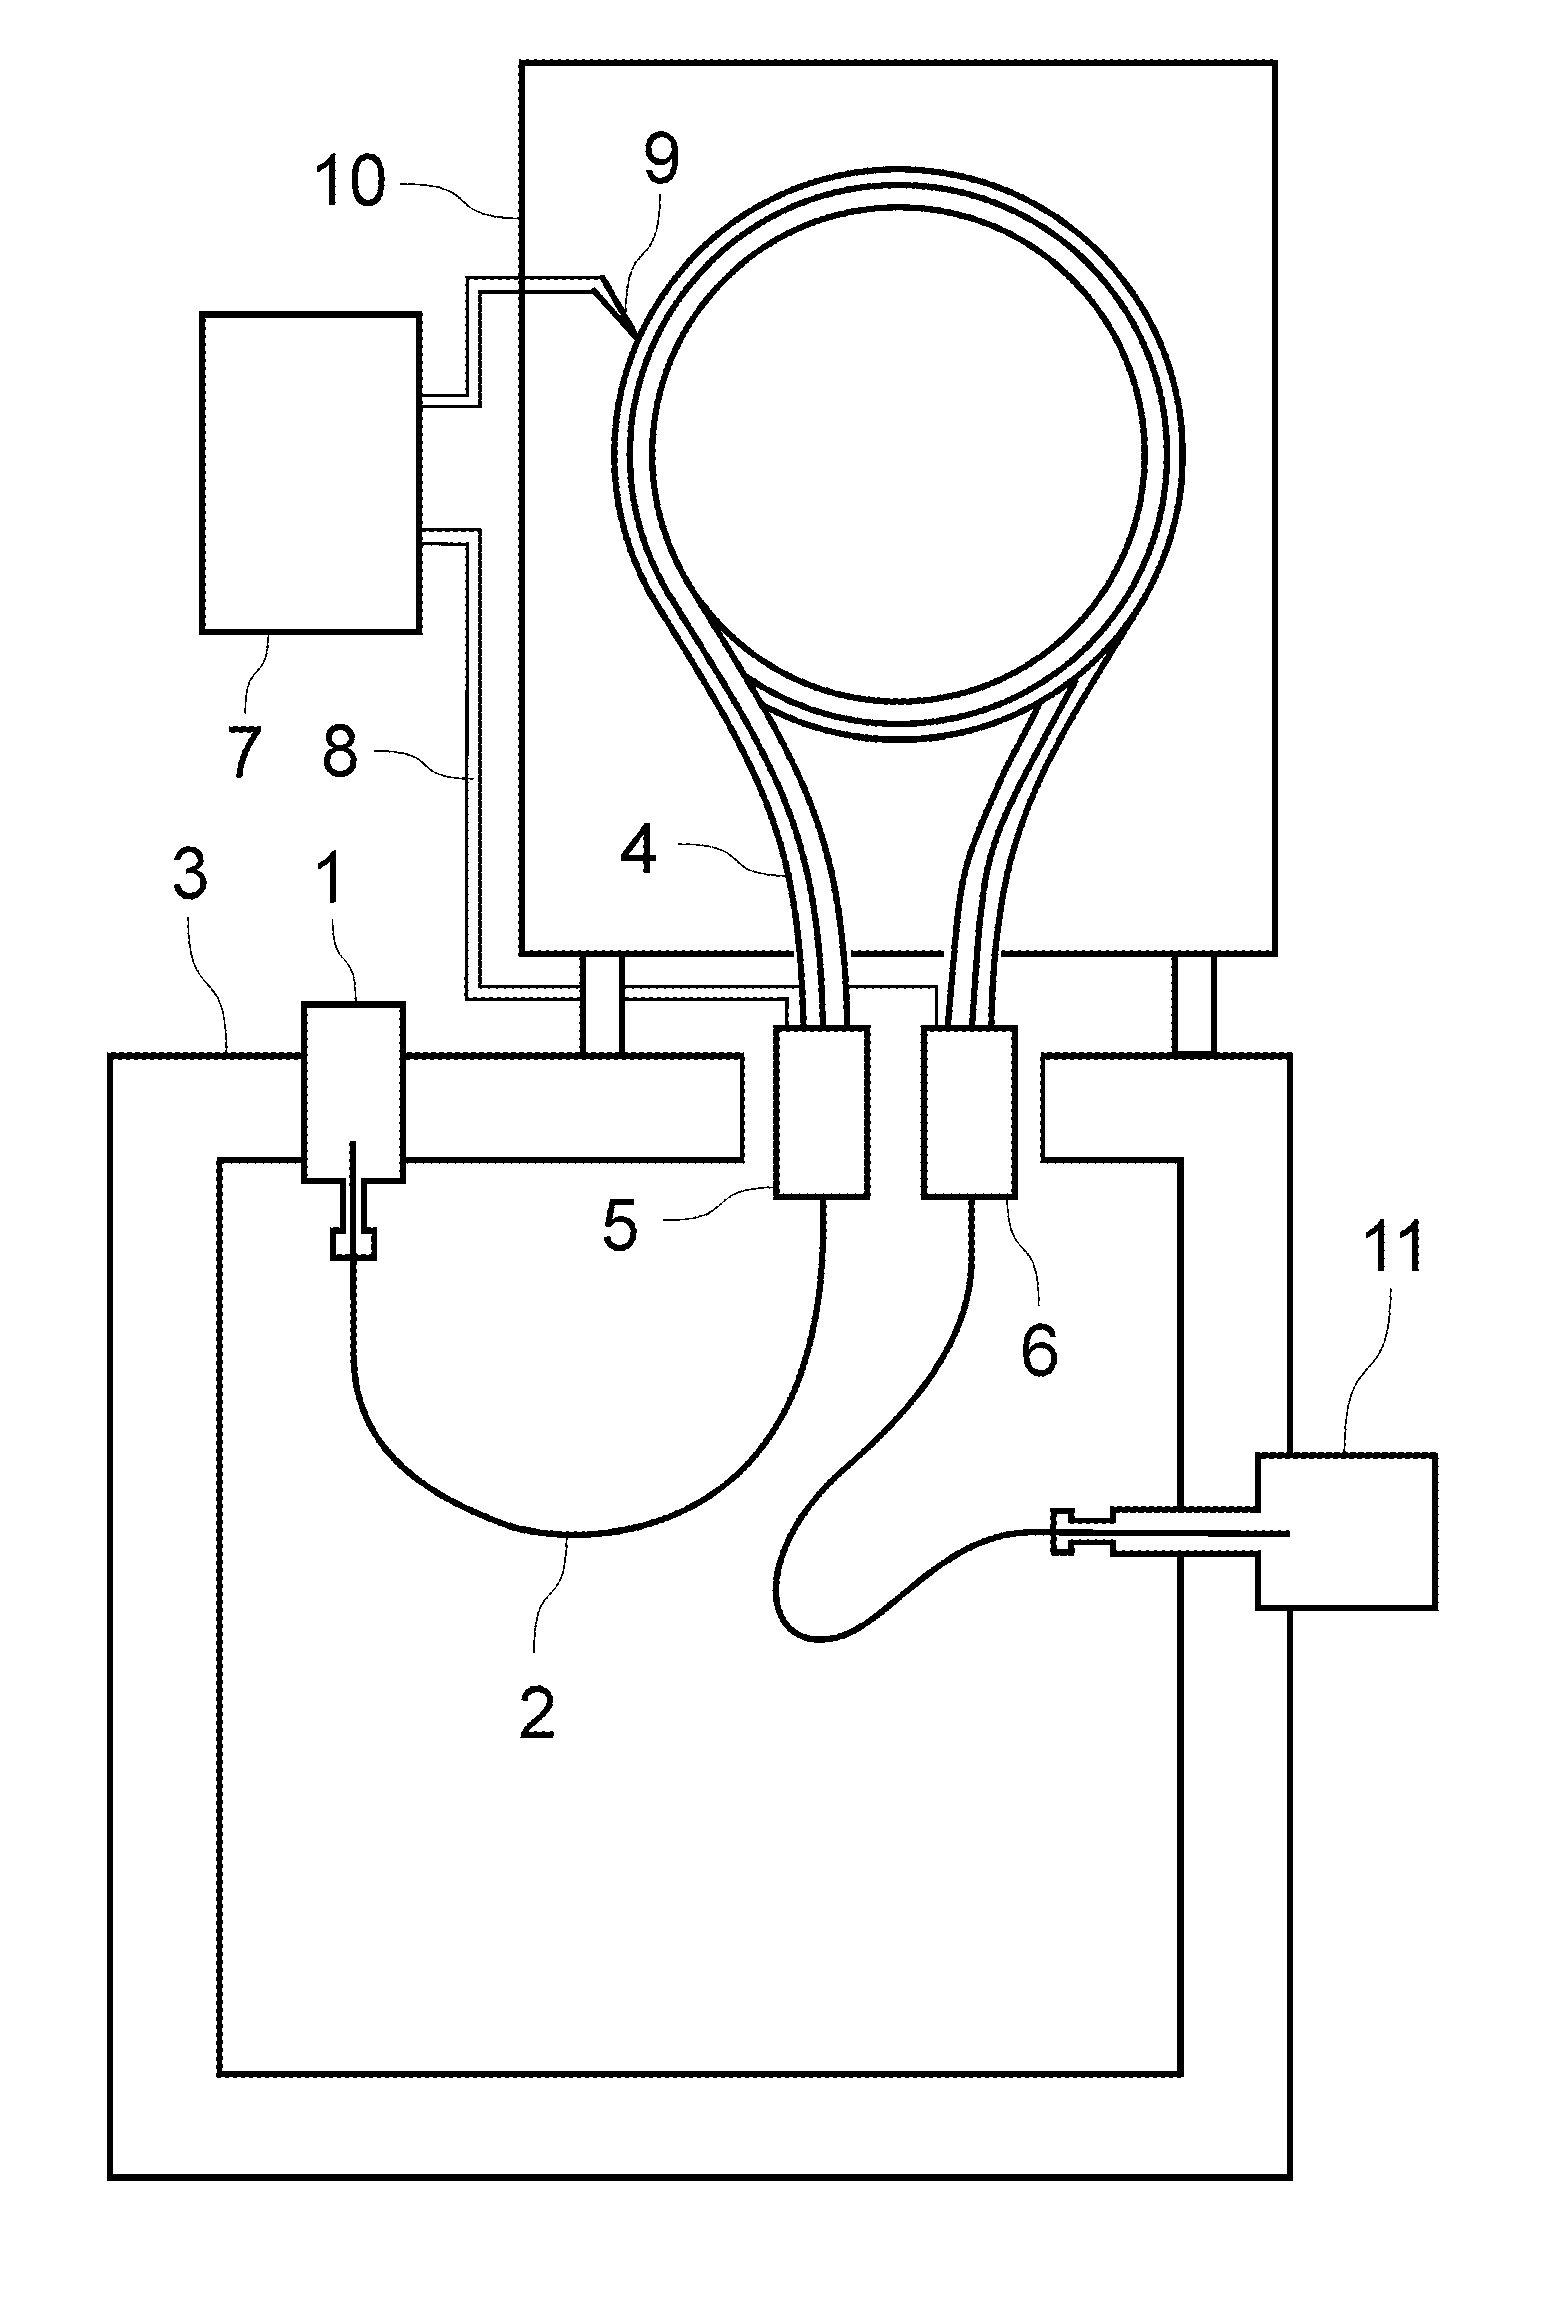 Fast gas chromatograph method and device for analyzing a sample